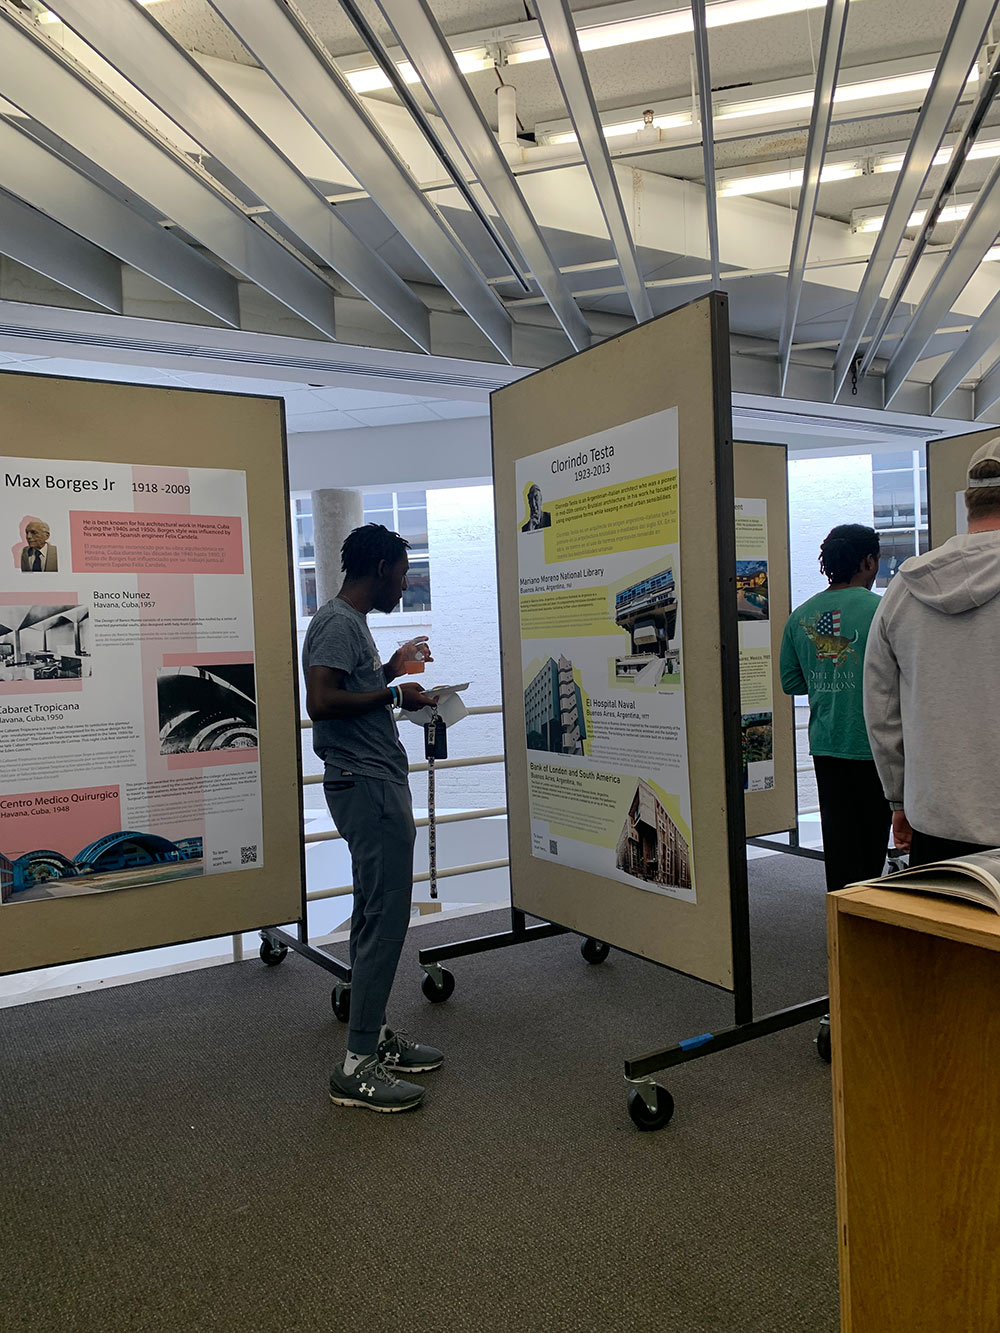 View of a student looking at the showcased exhibit.